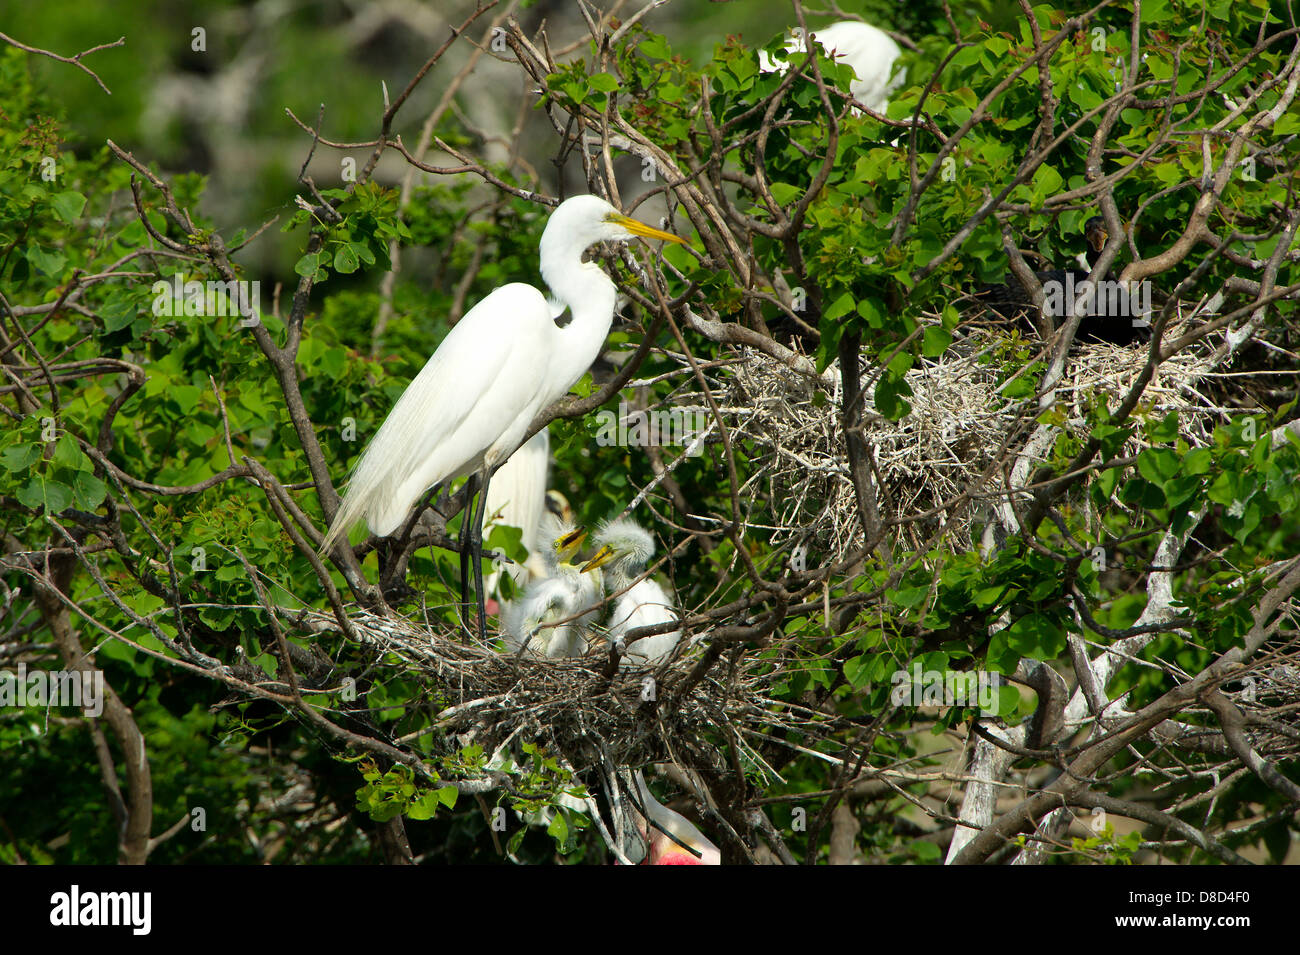 great white egret perched on a branch protecting the nest with chicks, Bolivar Peninsula, Texas, USA Stock Photo